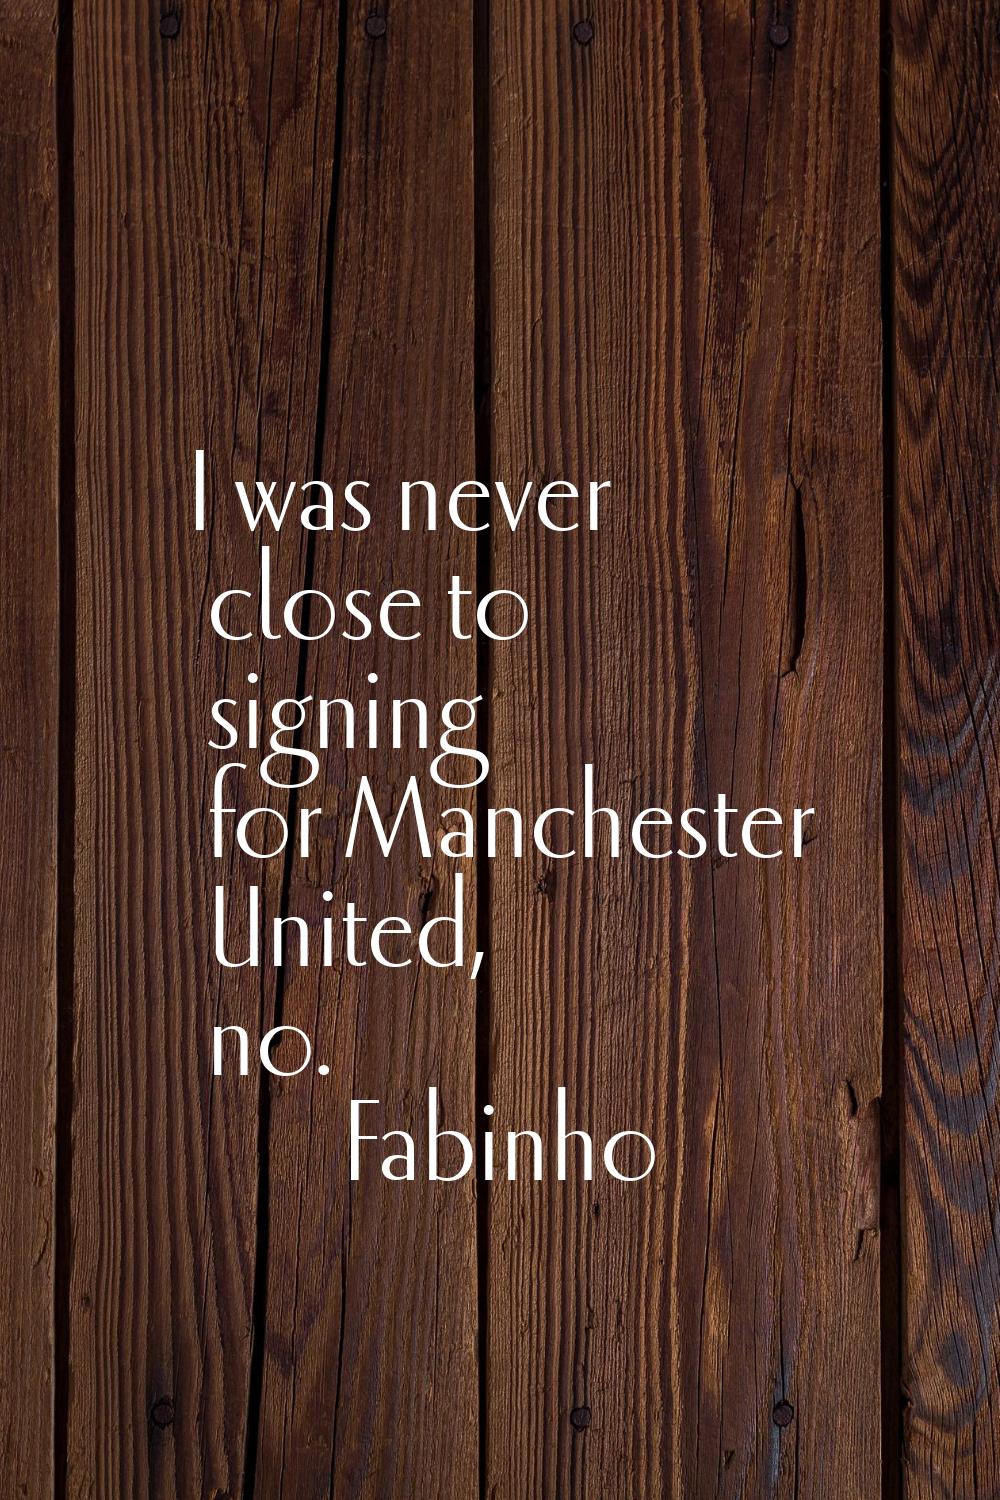 I was never close to signing for Manchester United, no.